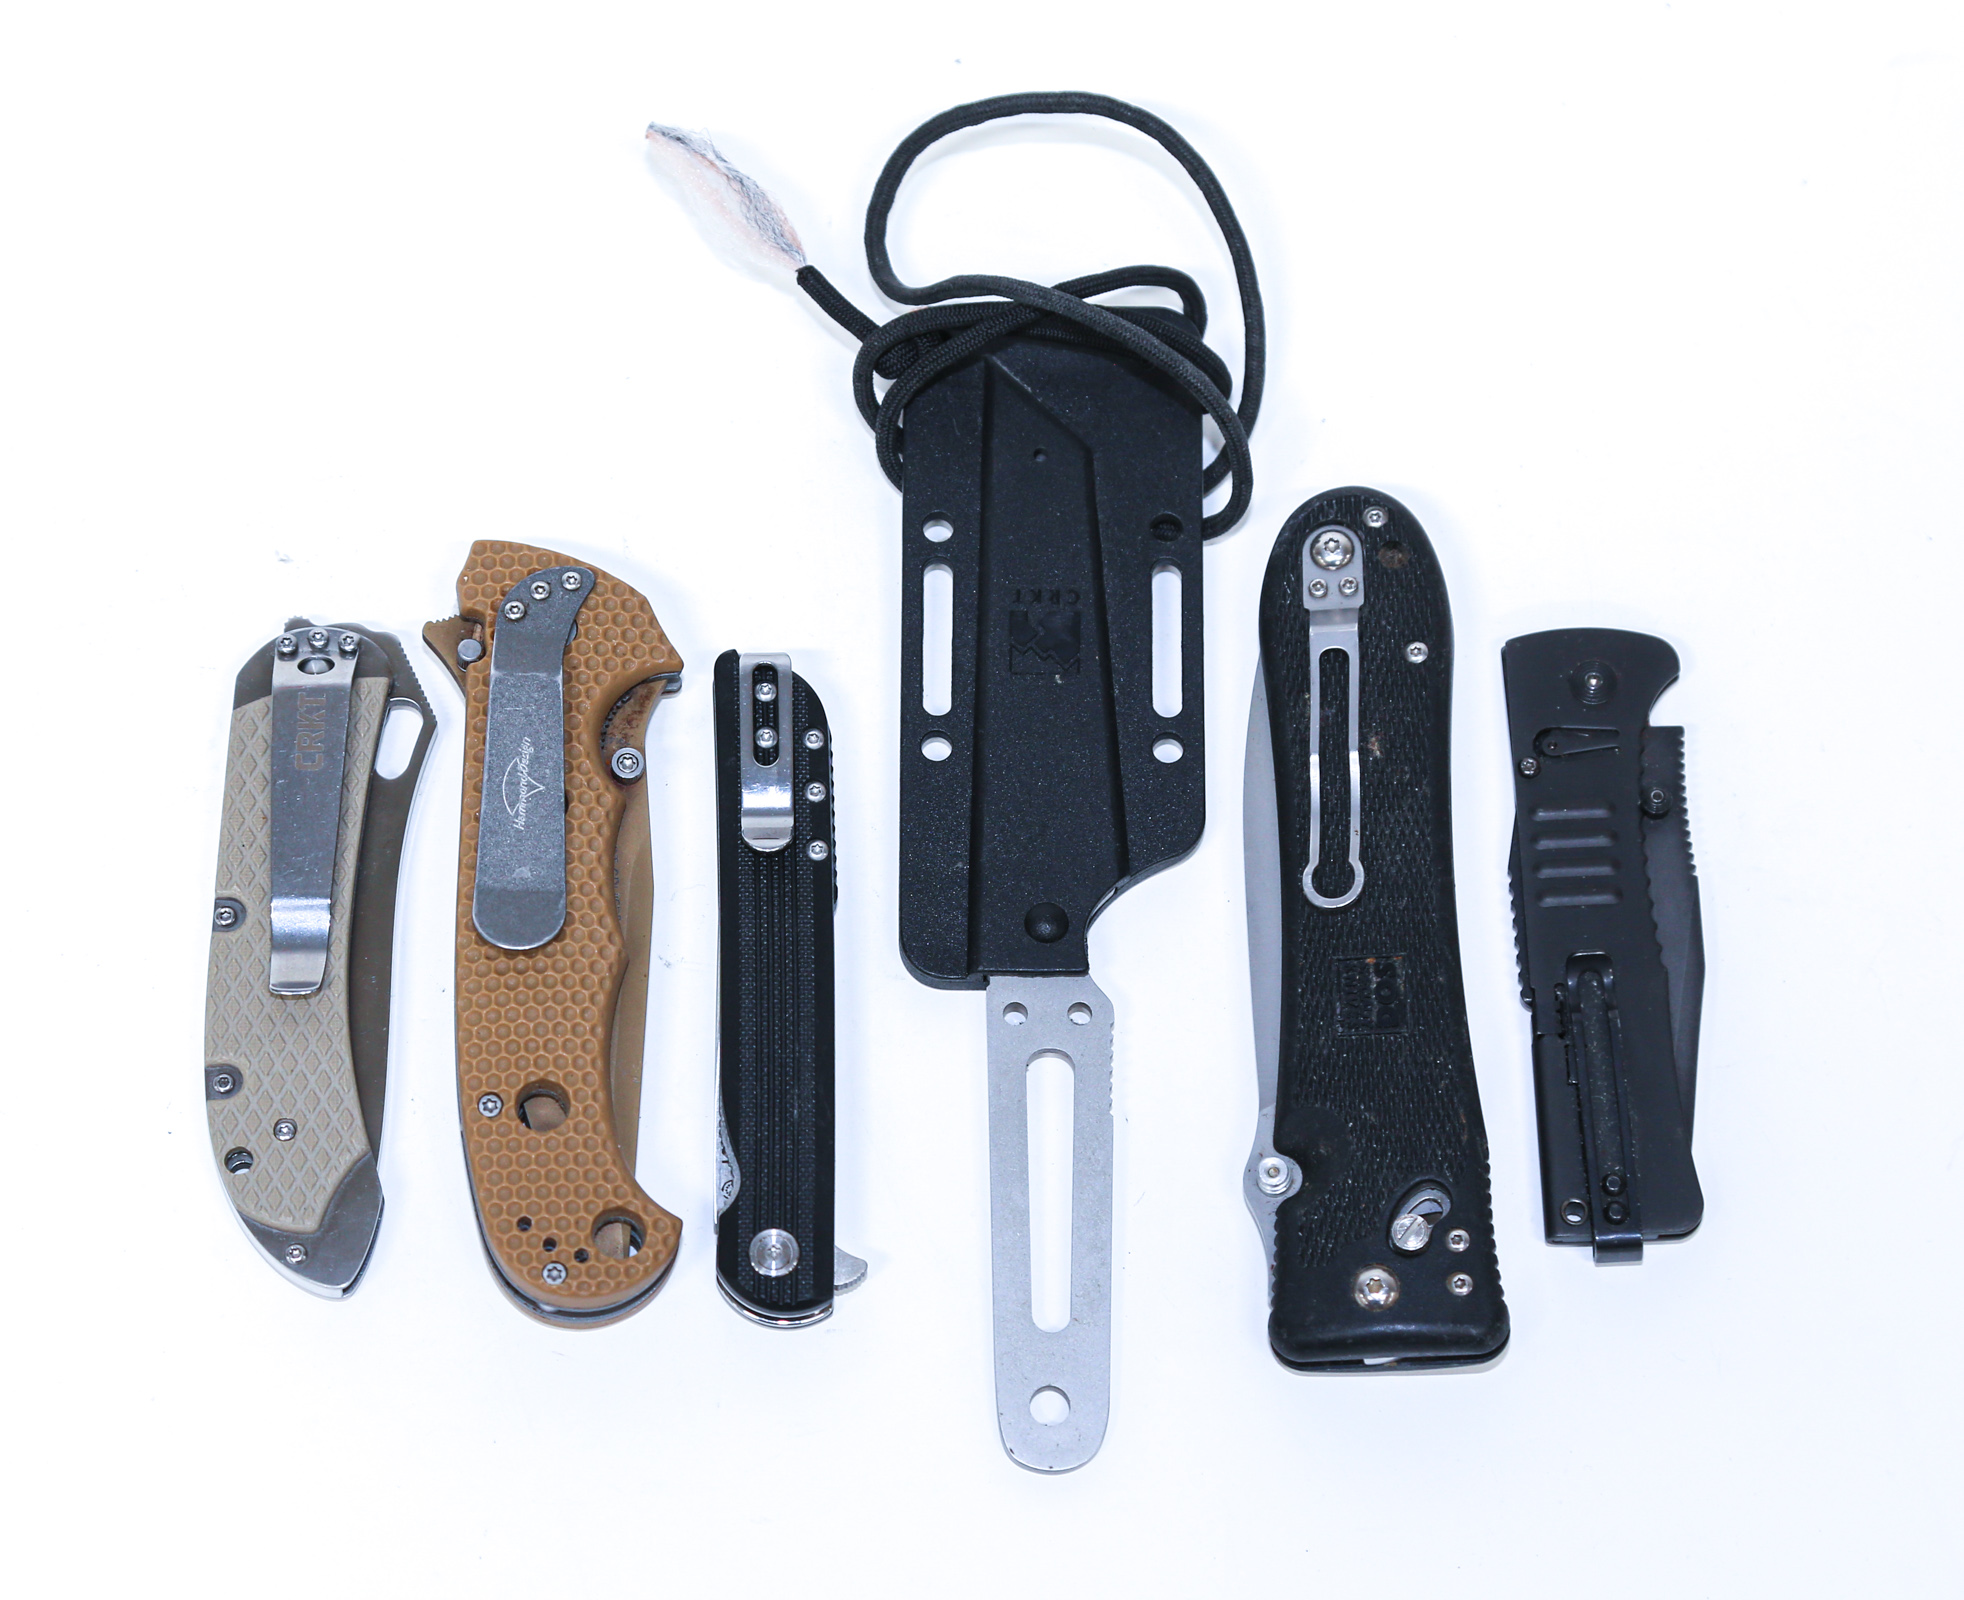 FOUR CRKT POCKET KNIVES WITH TWO